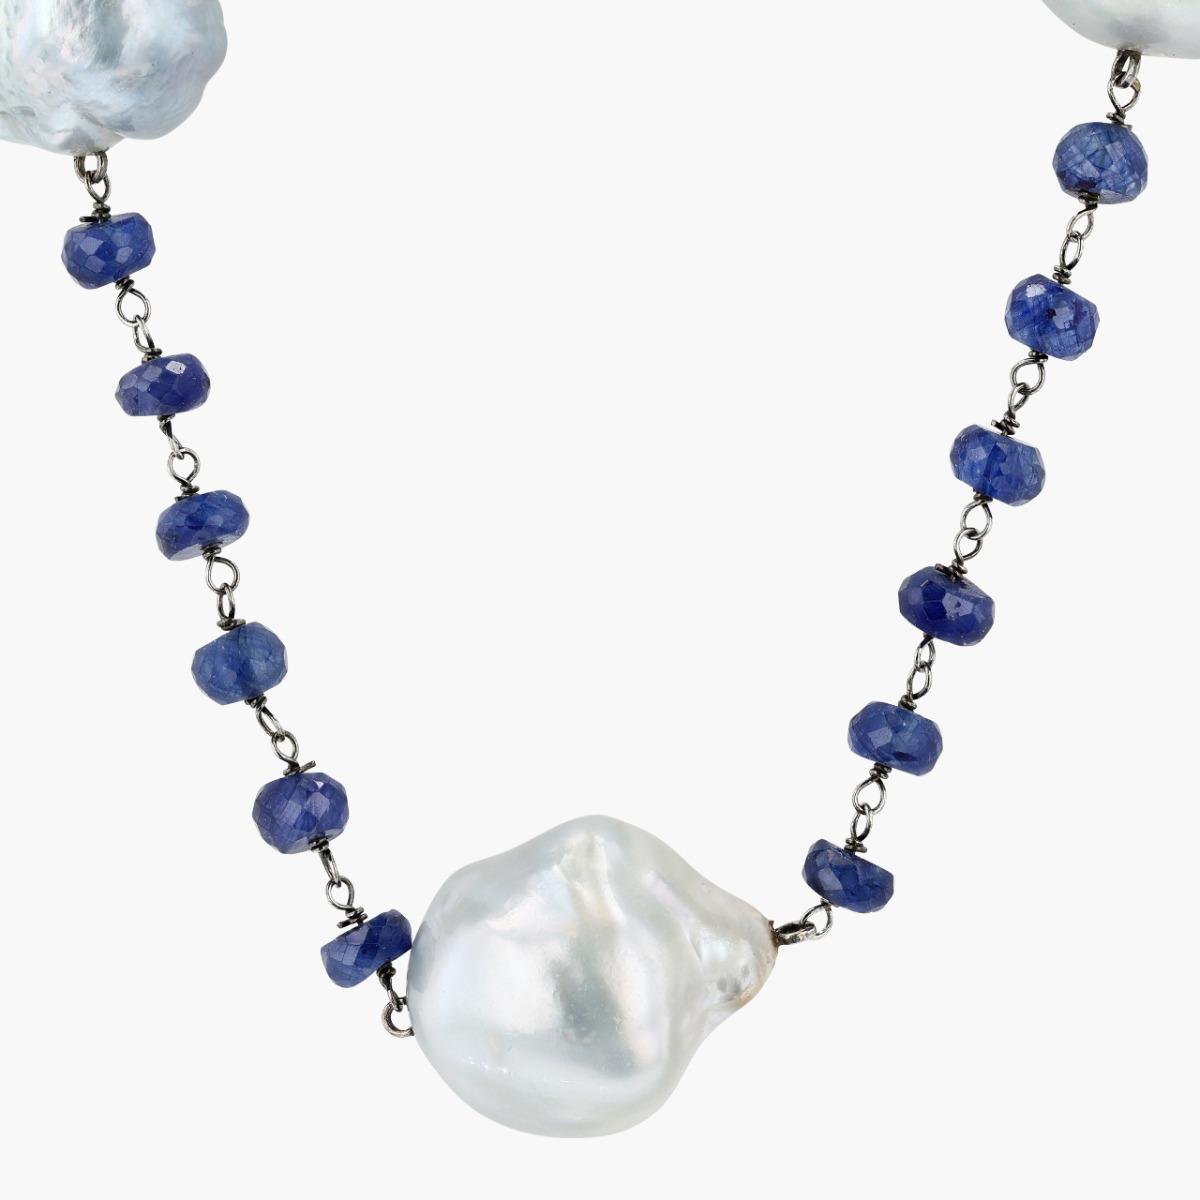 18K White Gold, South Sea Baroque Pearls And Sapphire Beads Necklace